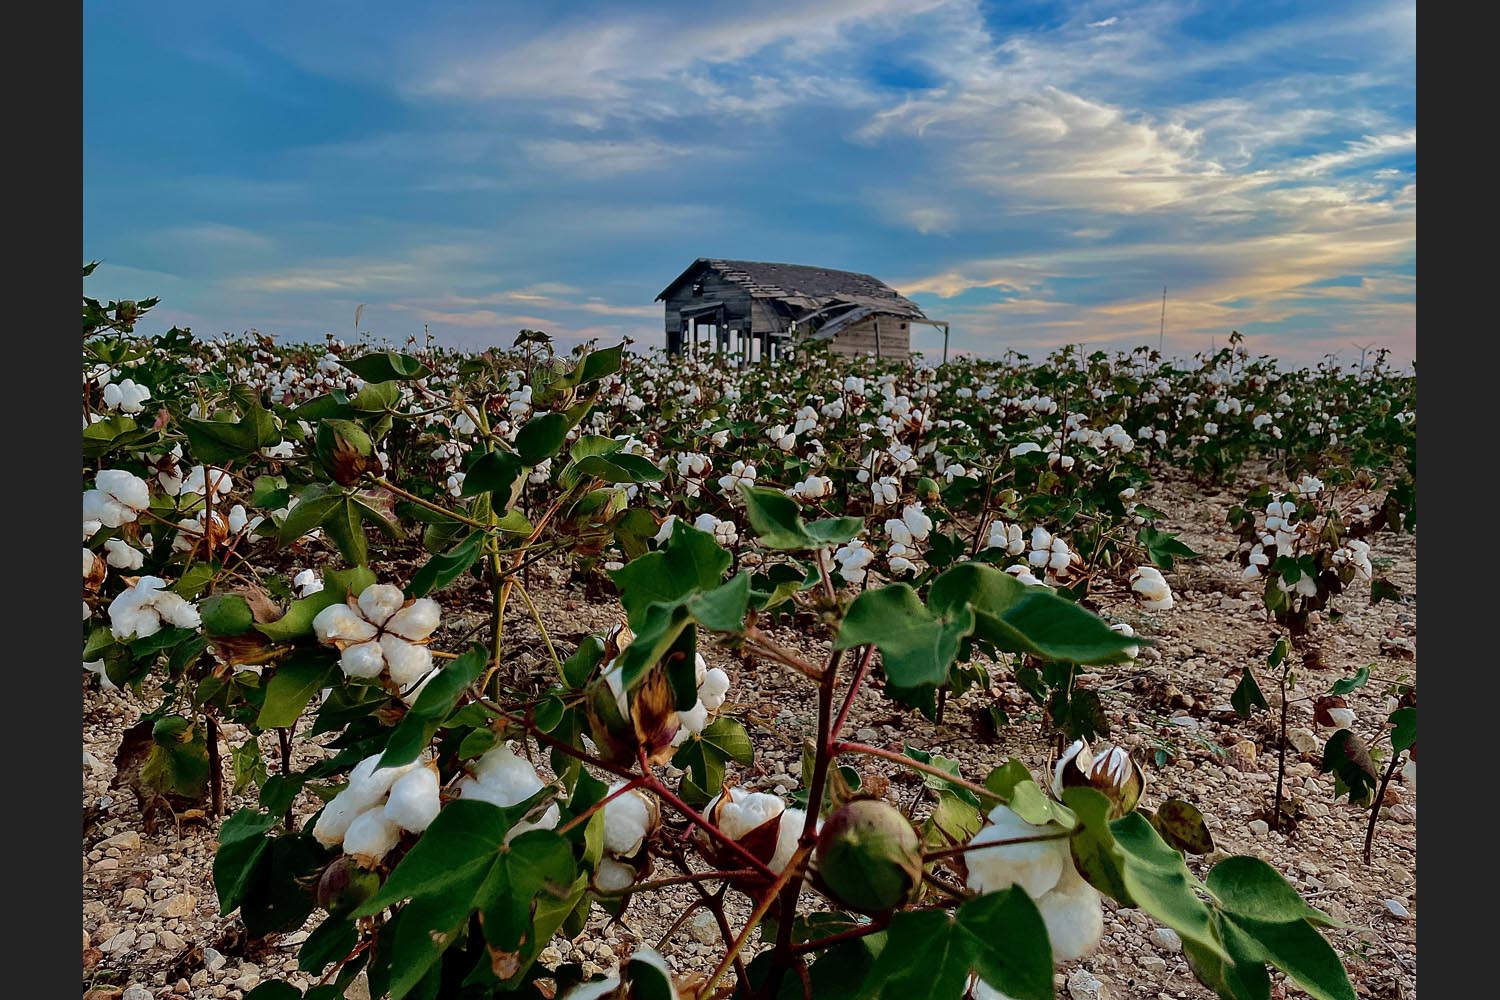 Kandace McNeese: West Texas Cotton - Sweetwater, Texas